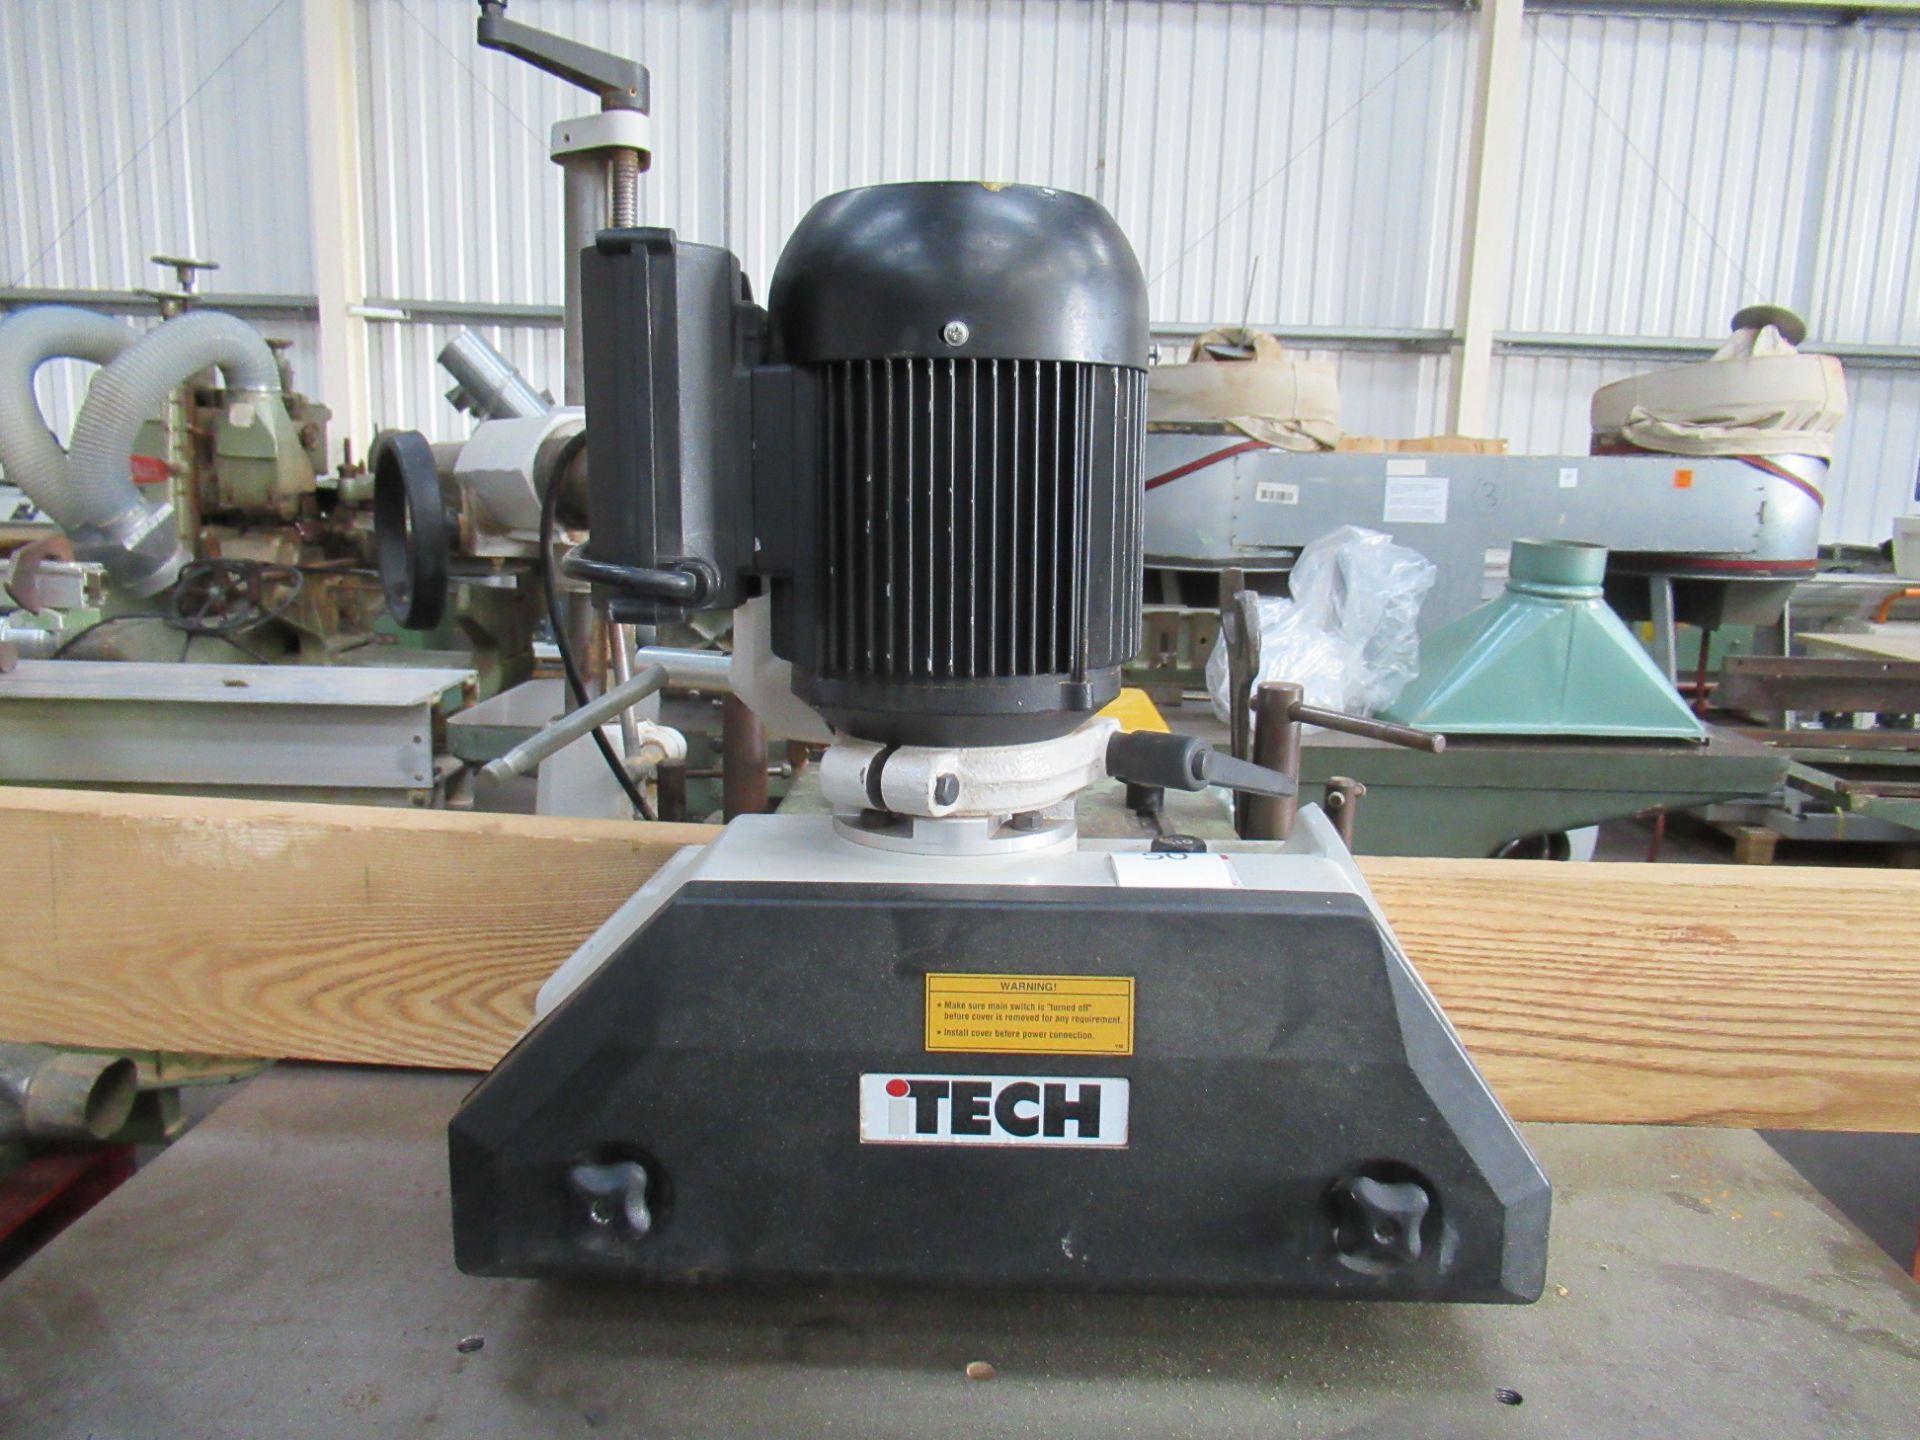 Sicma FN700 Spindle Moulder - 3ph - with iTech Powered Roller Feed - Image 3 of 6